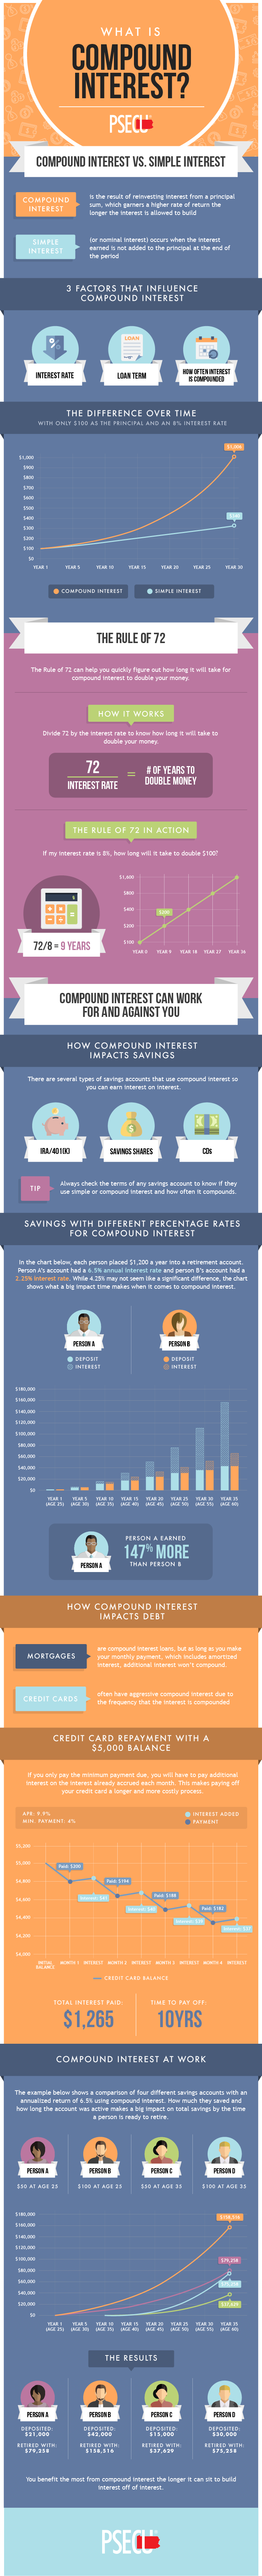 What is Compound Interest?